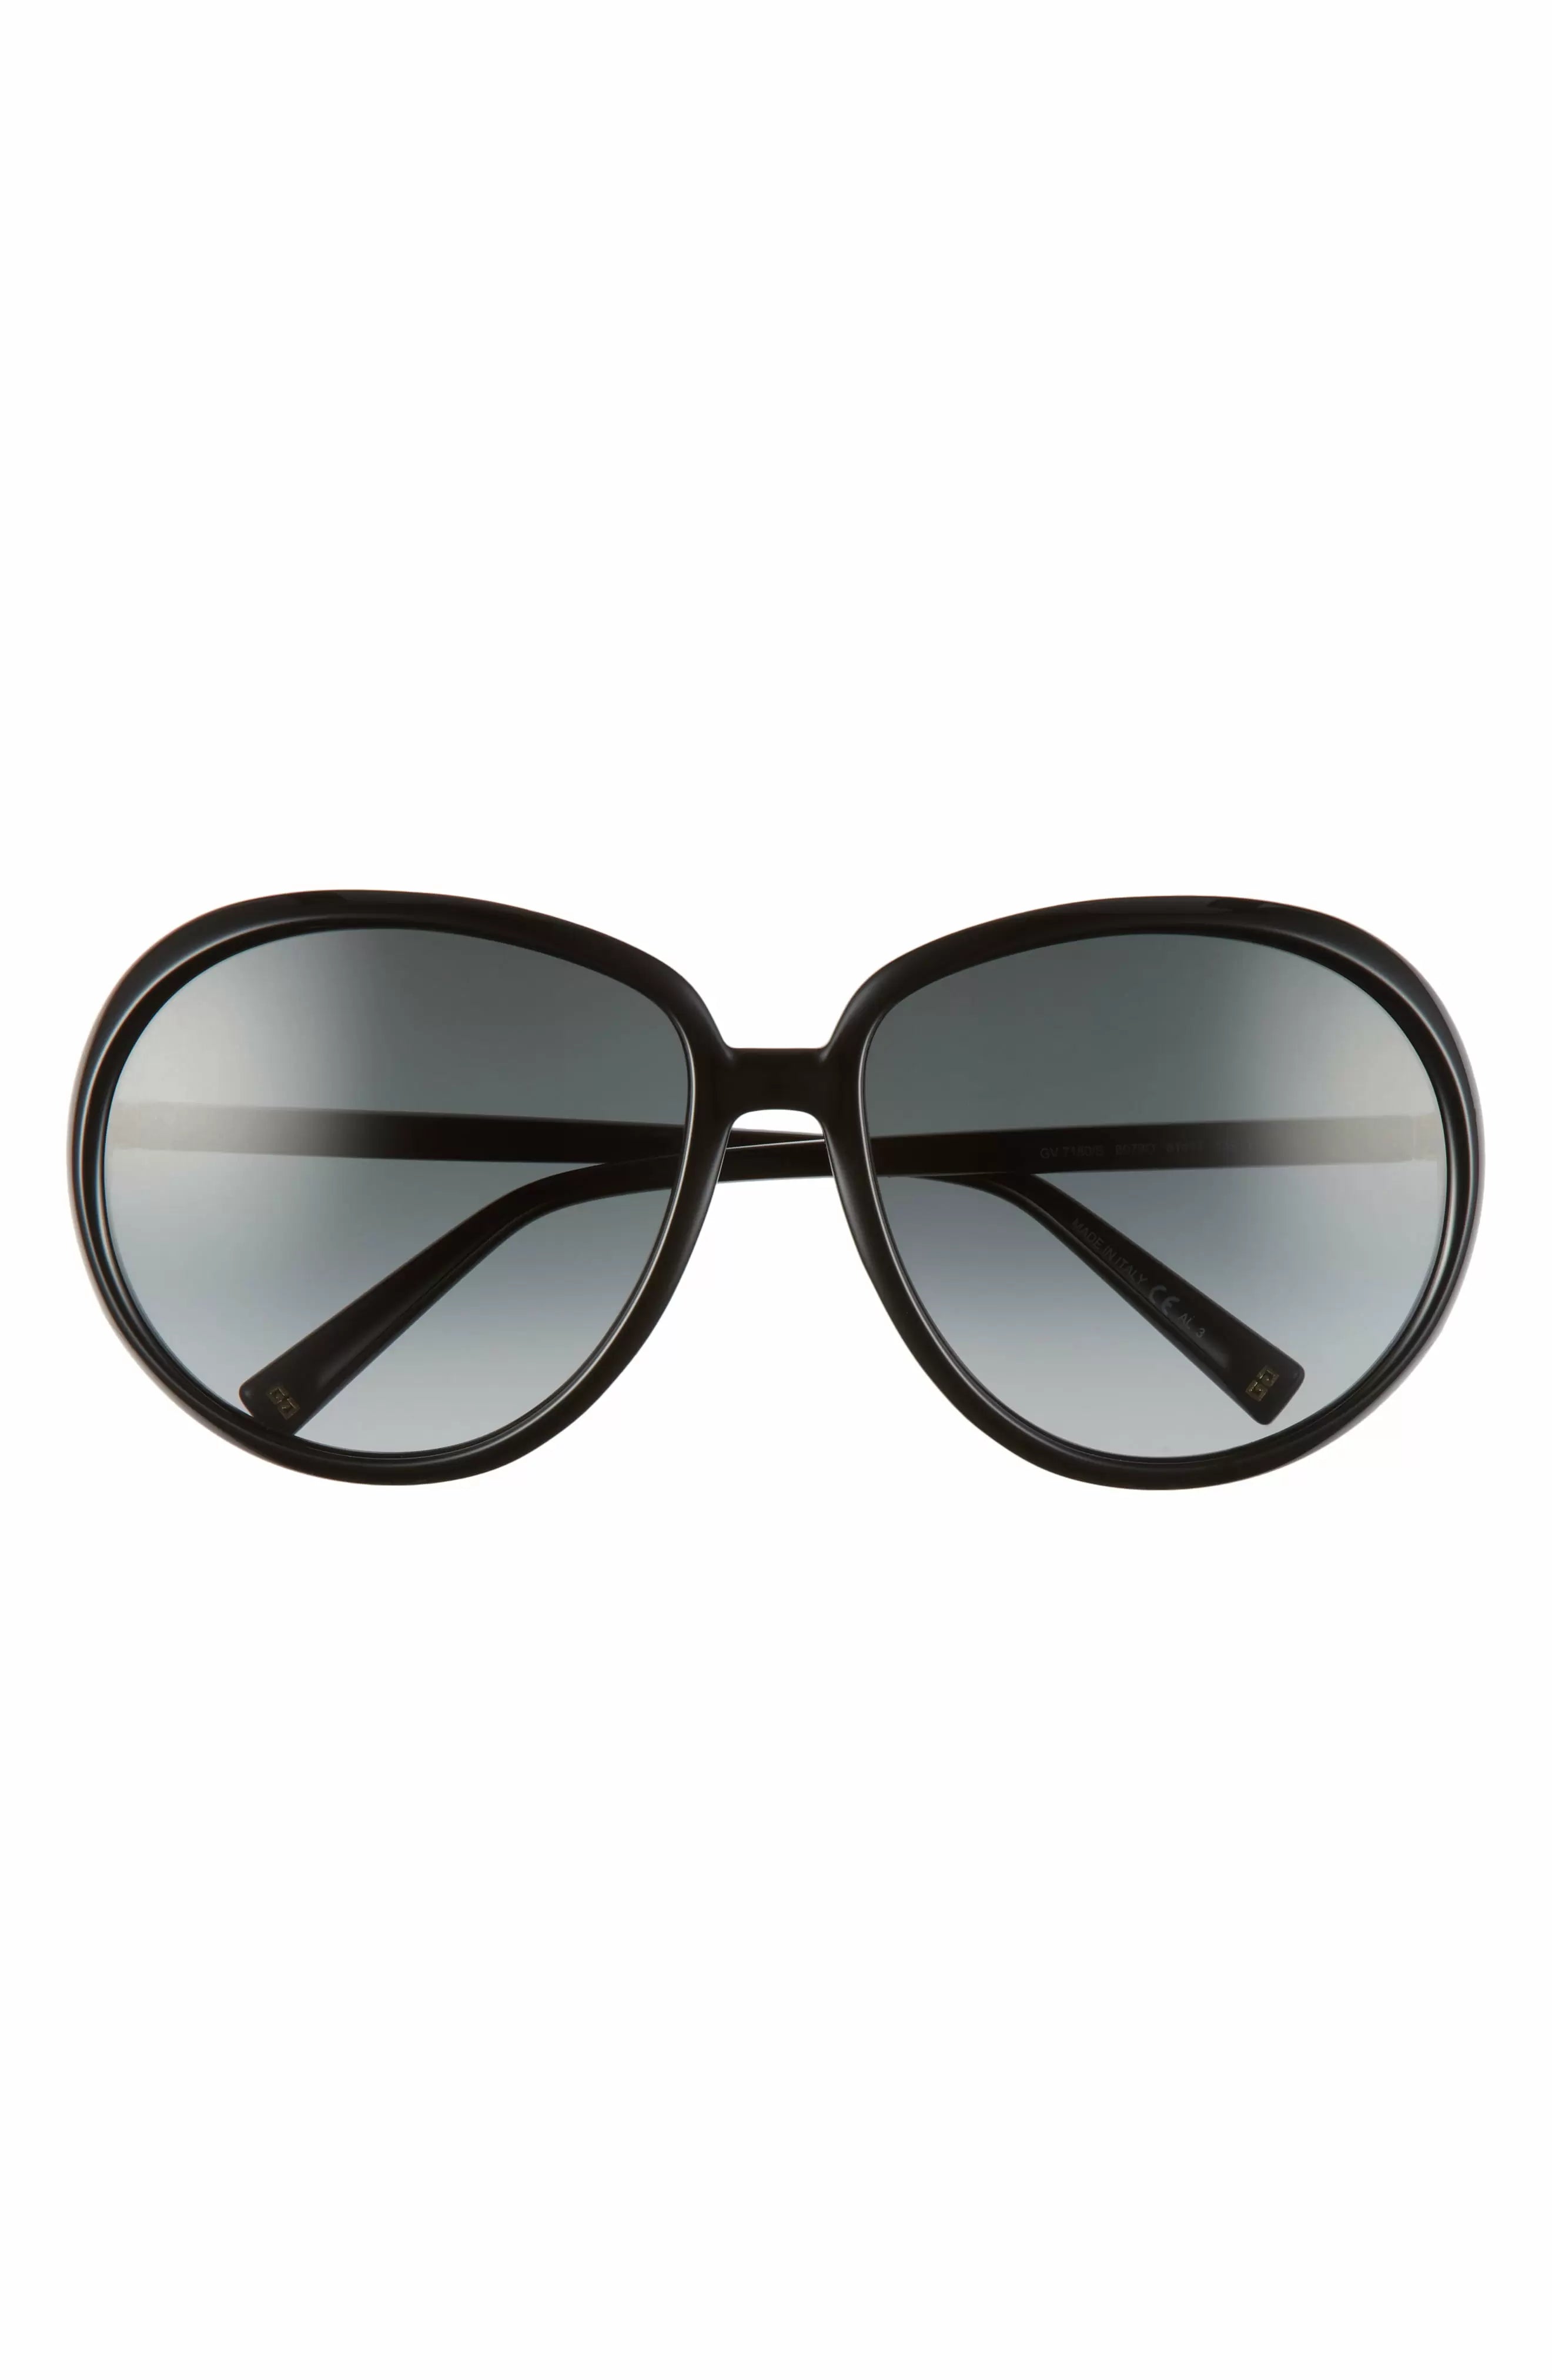 Givenchy 61mm Gradient Round Sunglasses 2